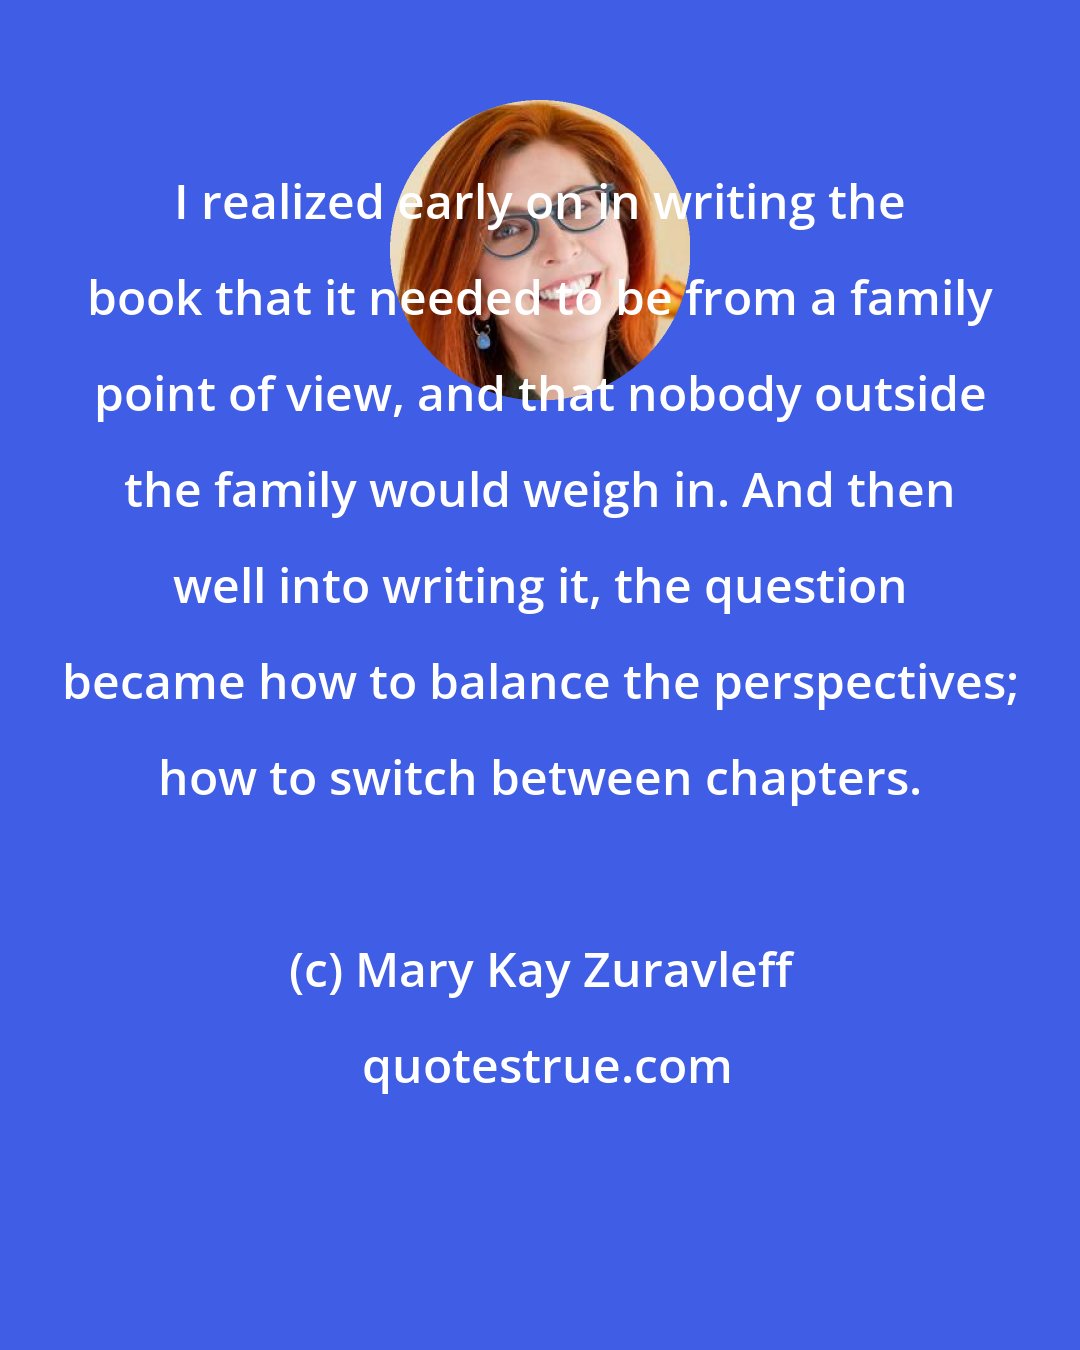 Mary Kay Zuravleff: I realized early on in writing the book that it needed to be from a family point of view, and that nobody outside the family would weigh in. And then well into writing it, the question became how to balance the perspectives; how to switch between chapters.